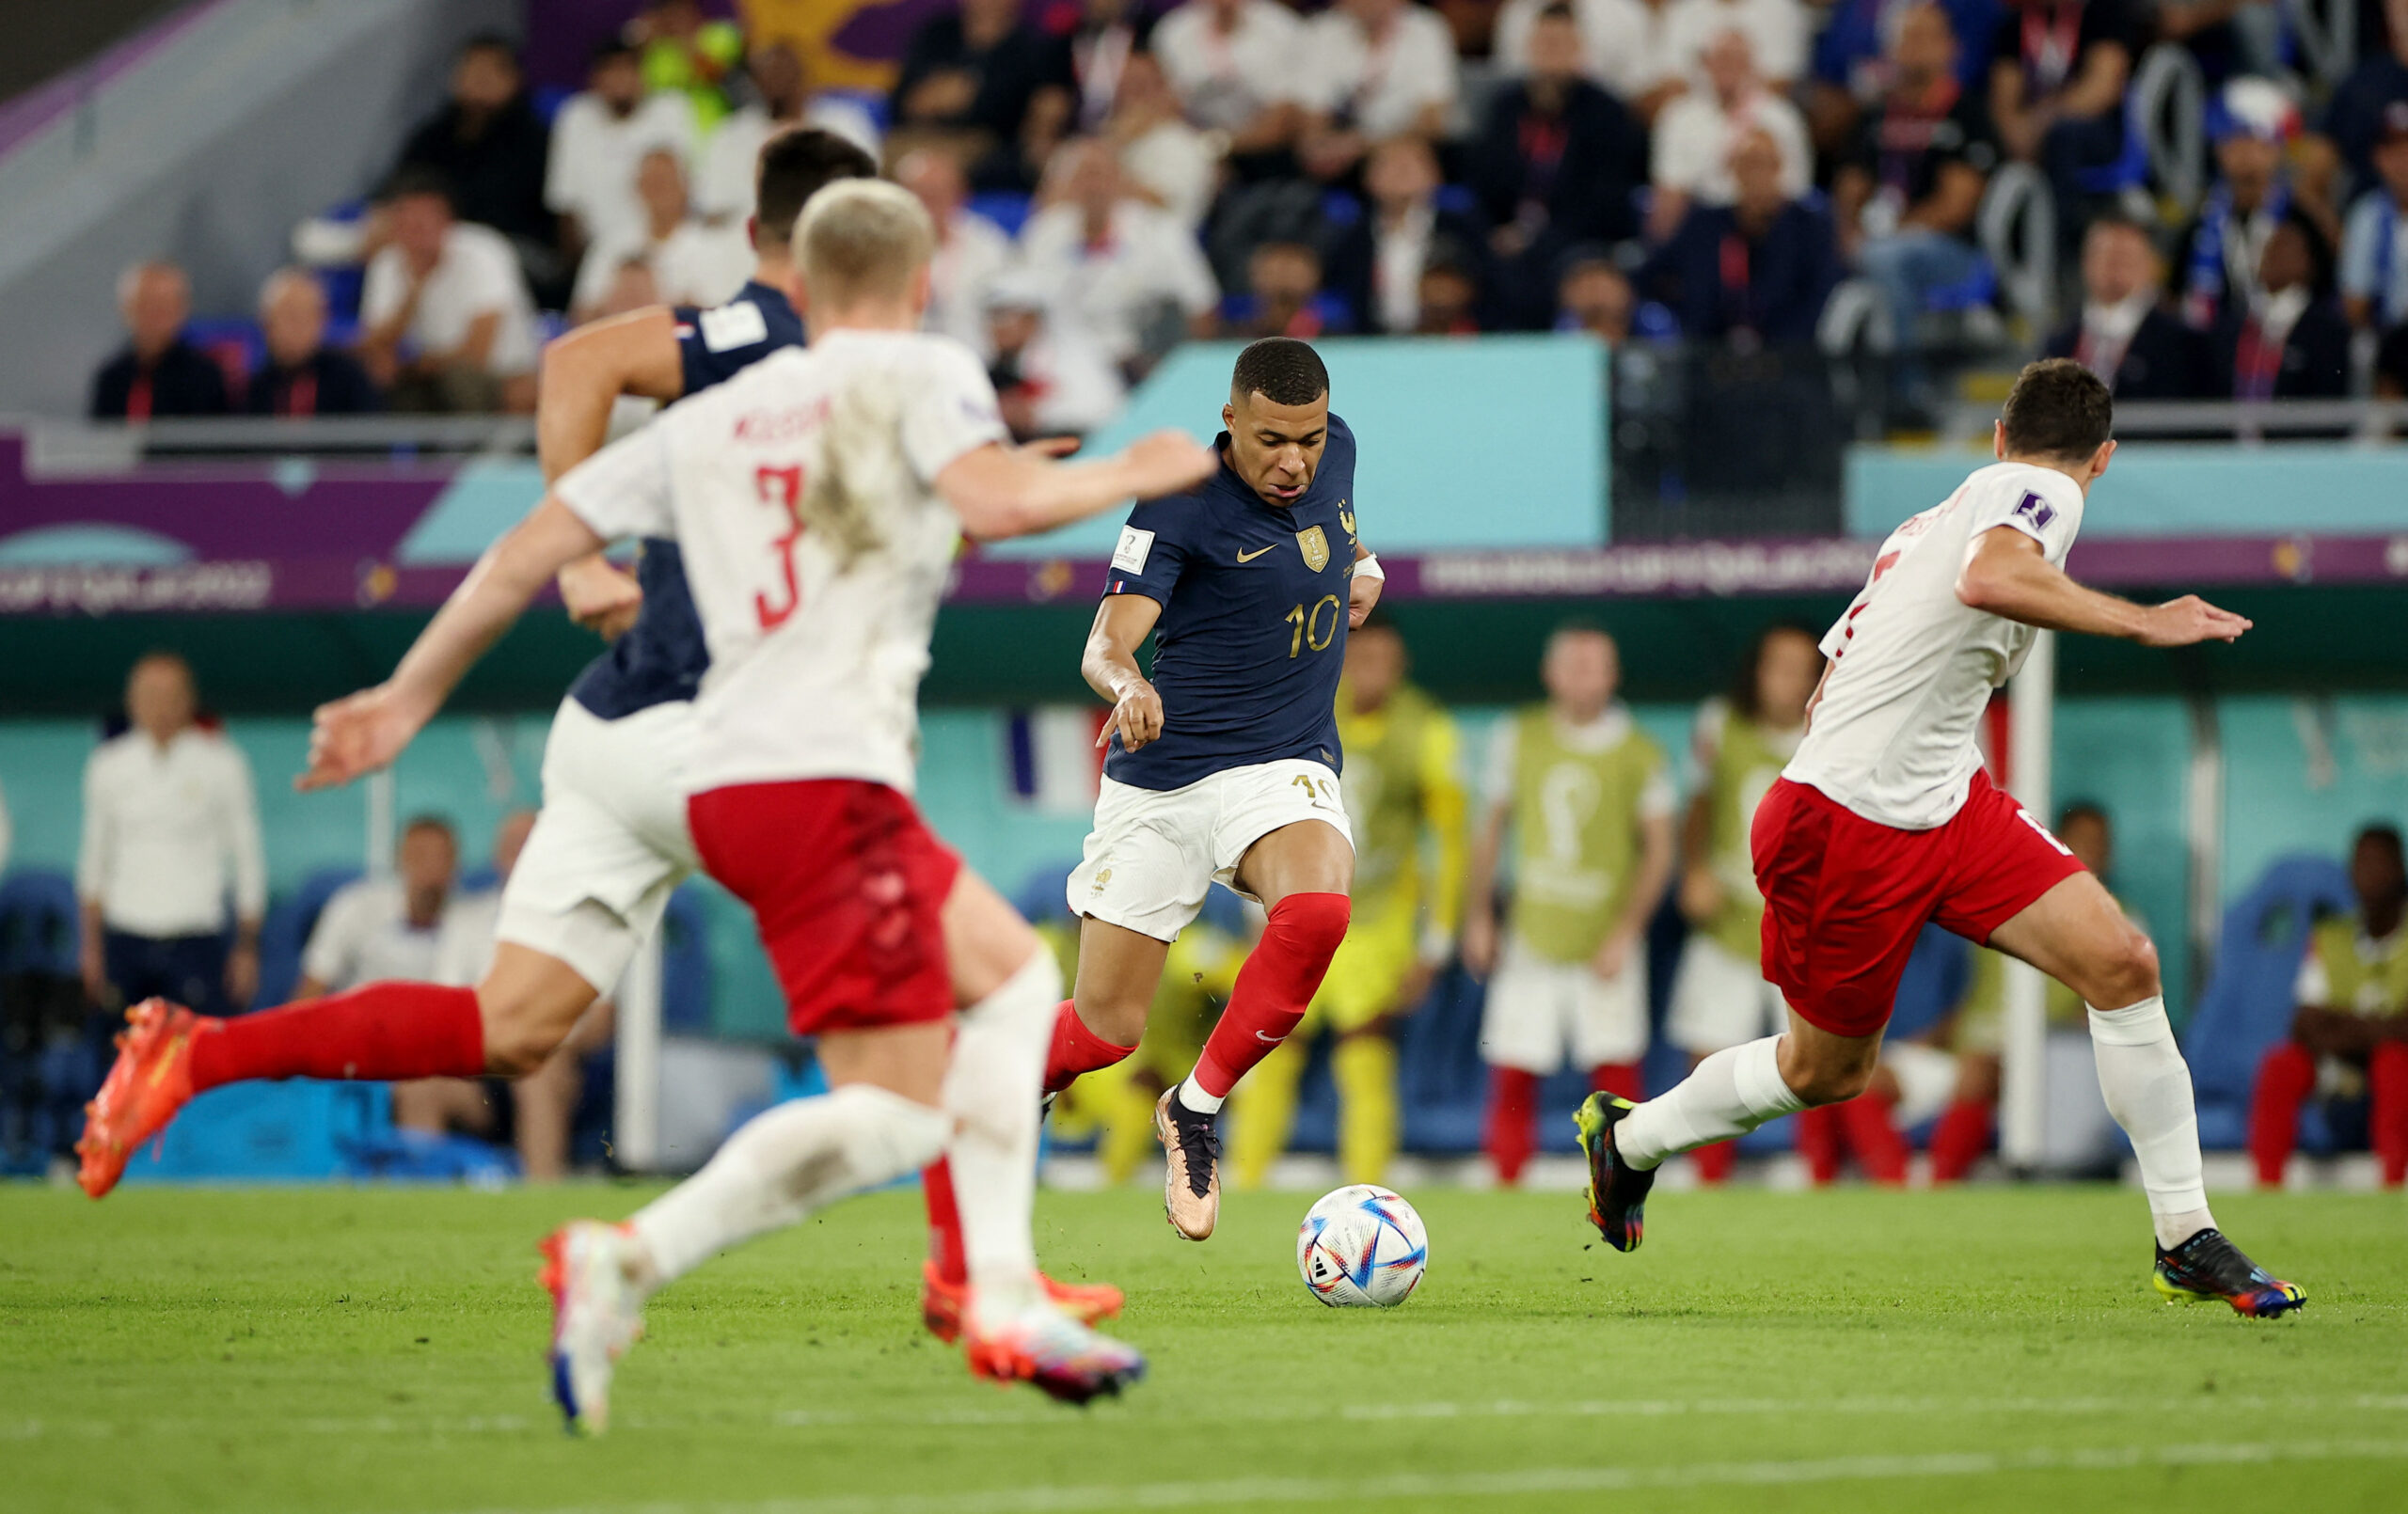 Denmark succumbed to a 2-1 defeat to France in a mouth-watering round-two game of the 2022 World Cup Group D, throwing their progression hopes into doubt